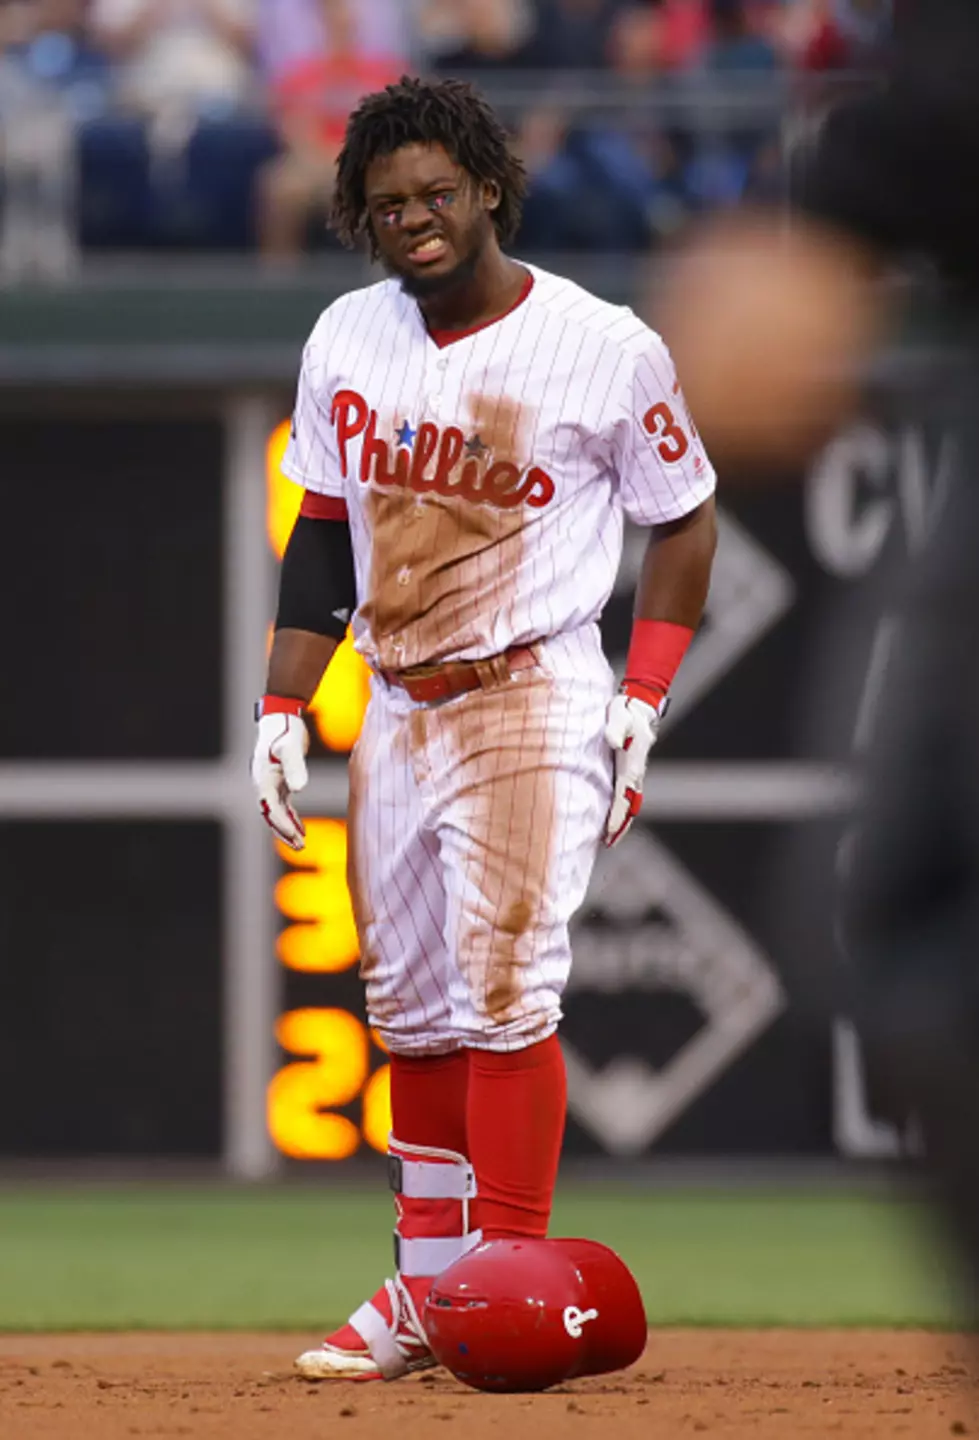 What Is Next After Phillies Historically Bad Month Of May?